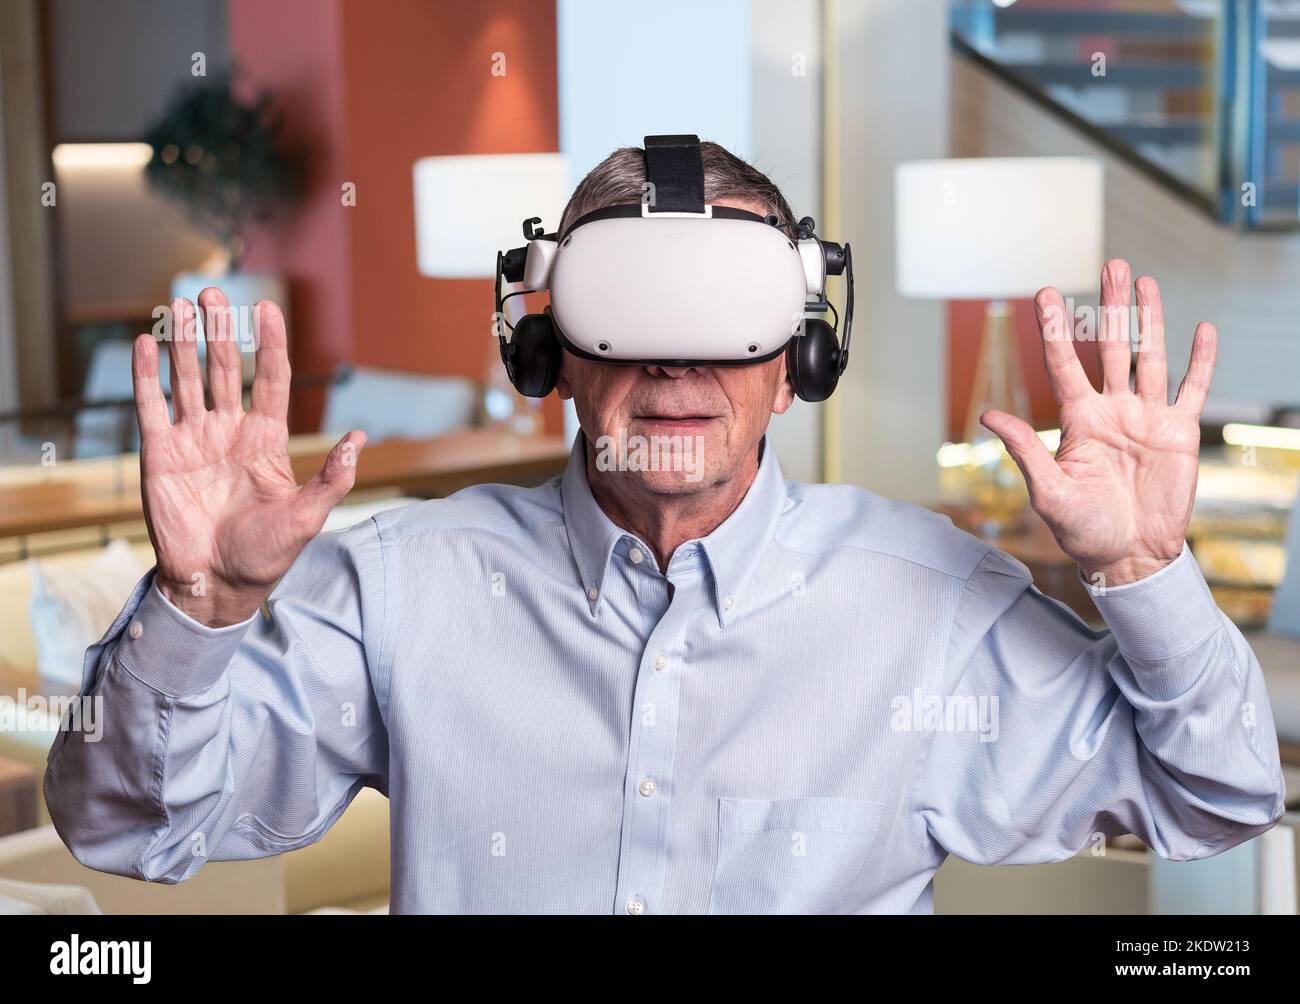 Concept of cybercrime with senior adult being held at ransom while wearing virtual reality headset Stock Photo